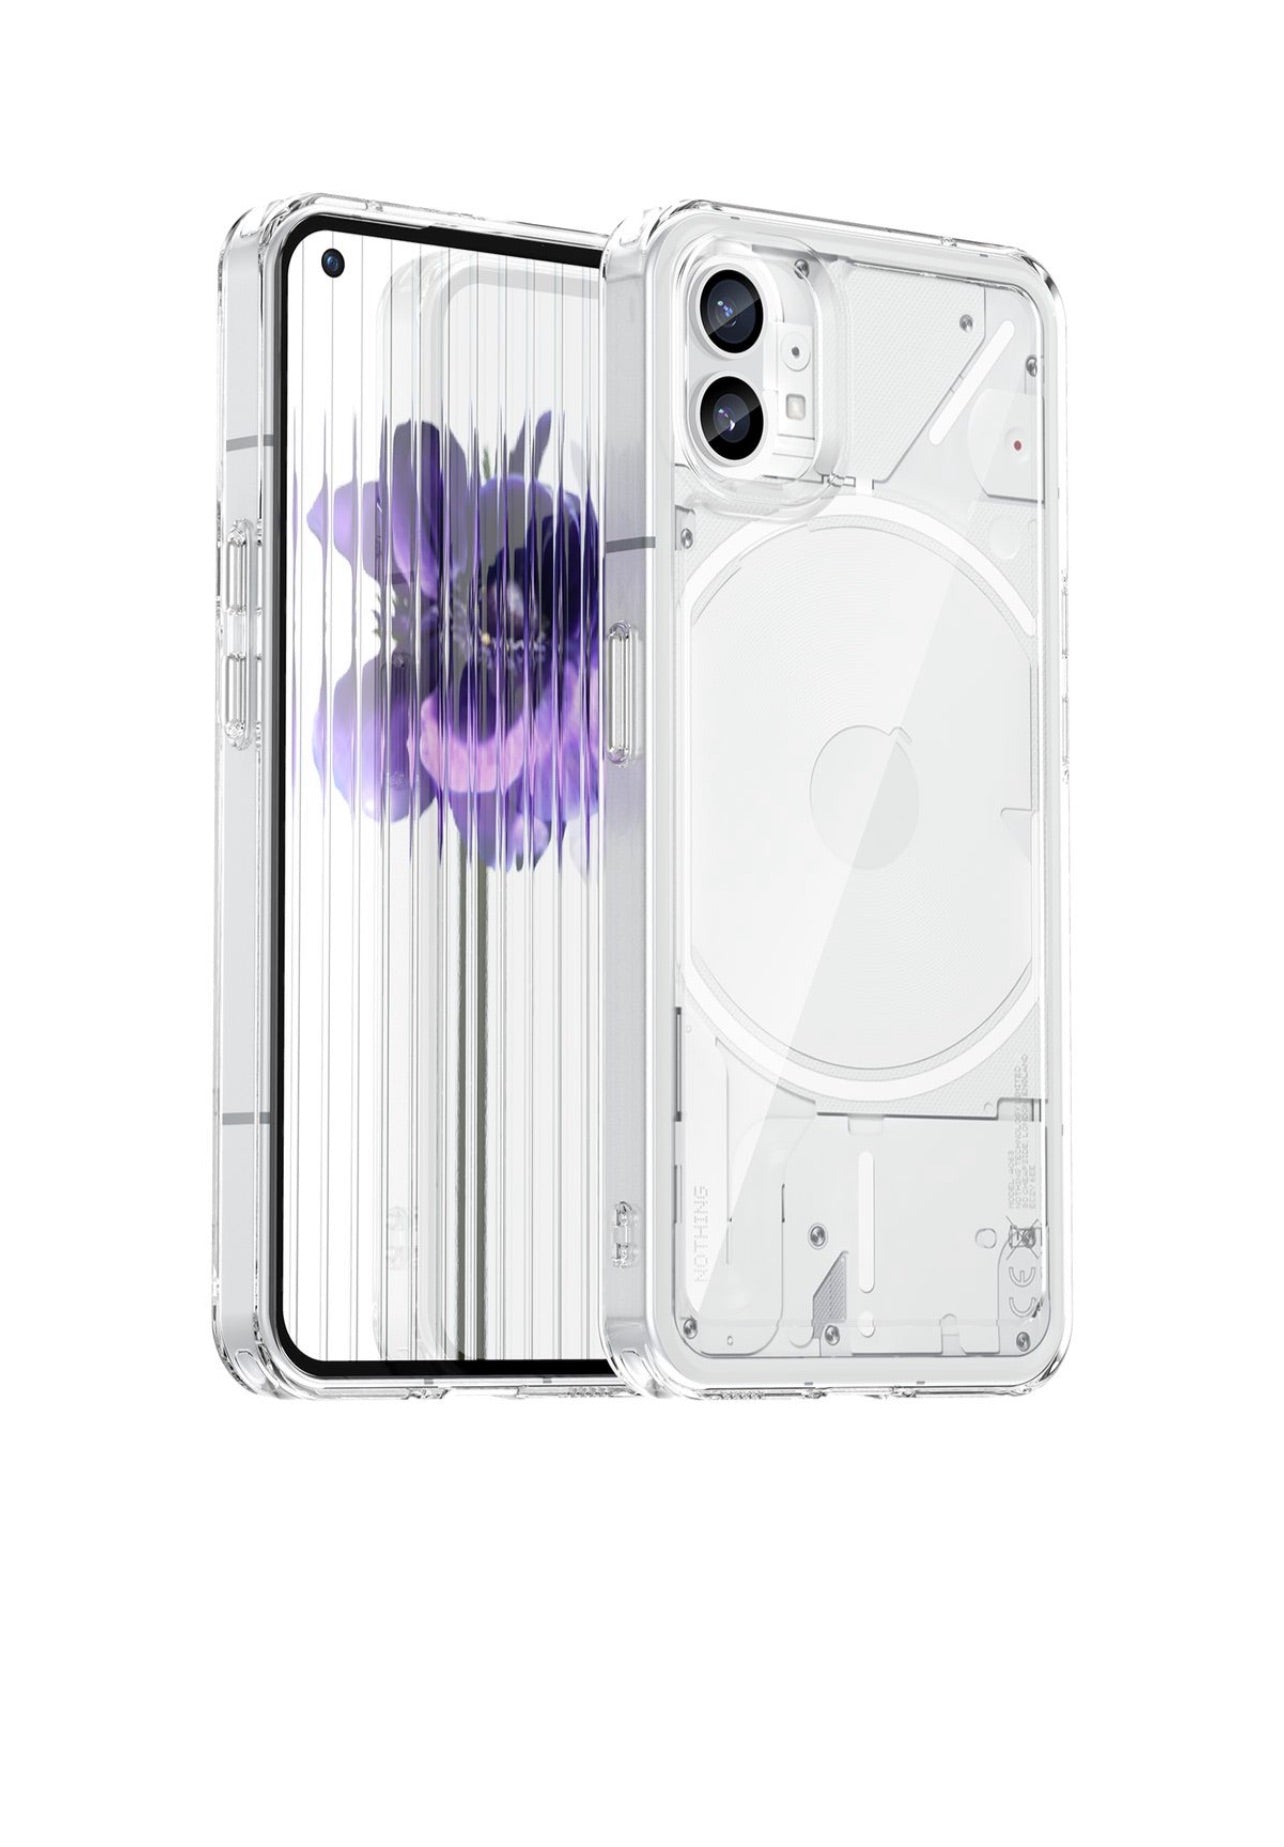 CellTime Shockproof Candy Clear Cover for Nothing Phone 1